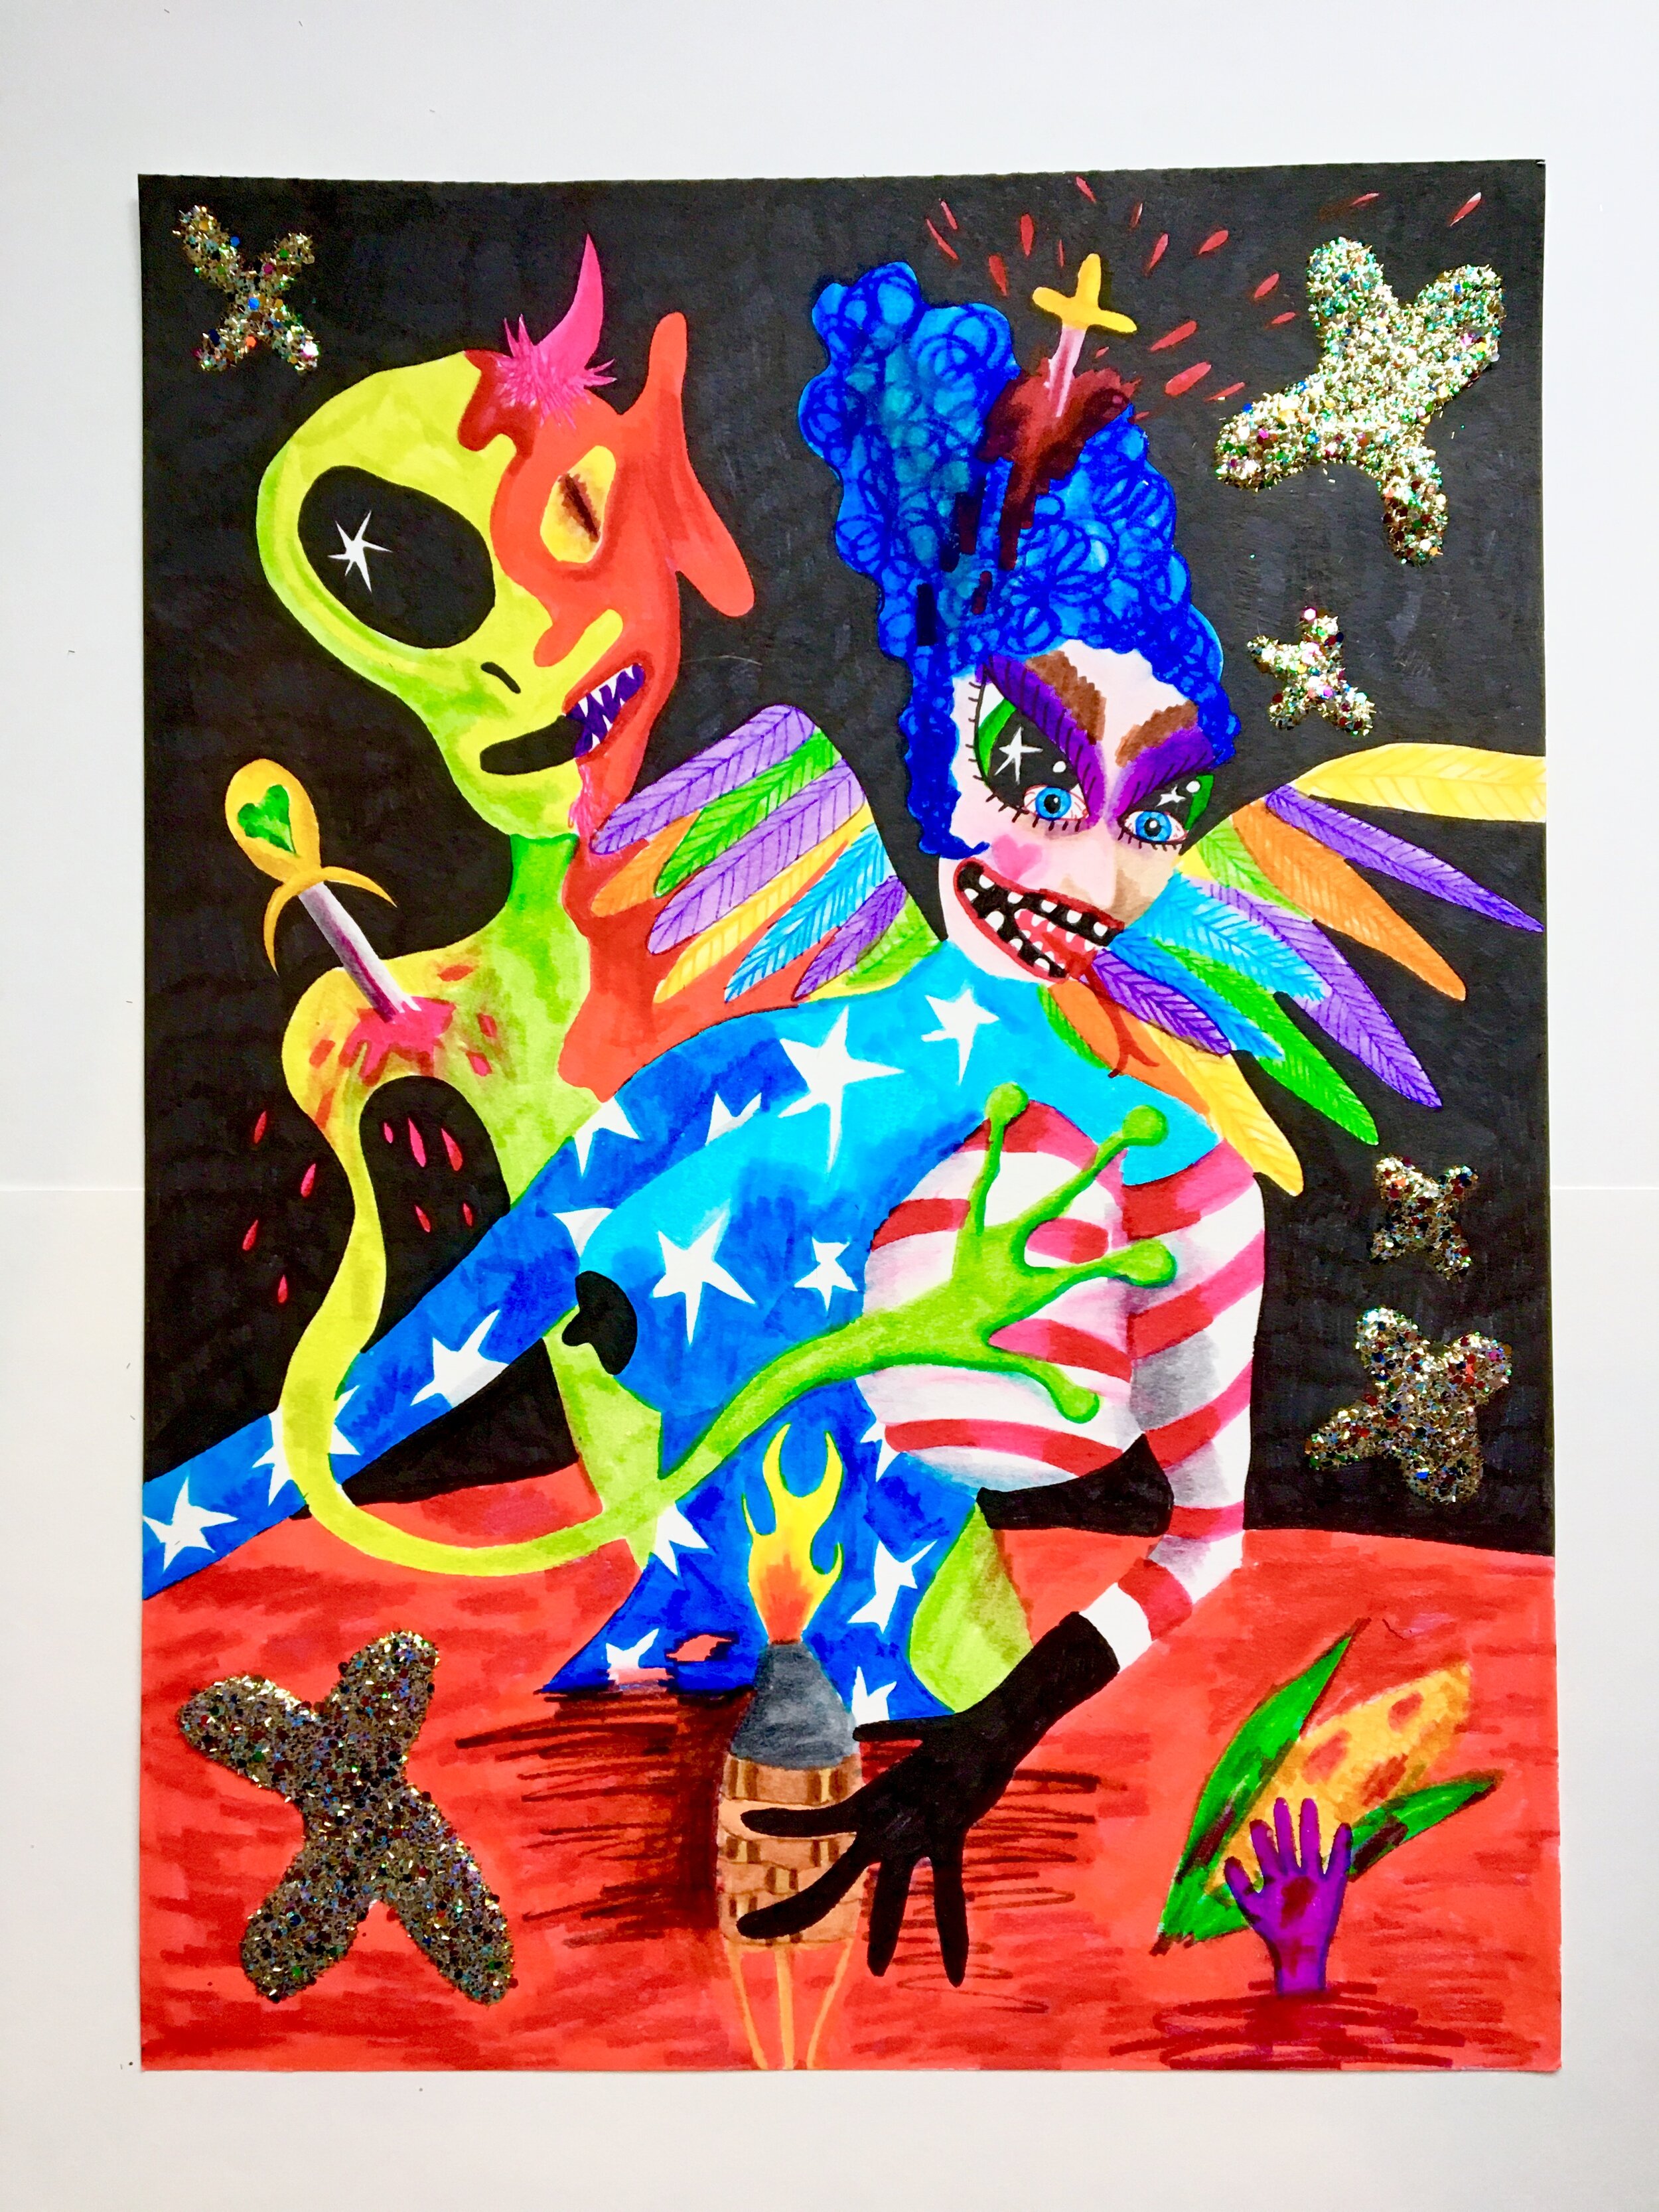   Alien/Devil ,  2017  24 x 18 inches (60.96 x 45.72 cm.)  Markers and glitter on paper 